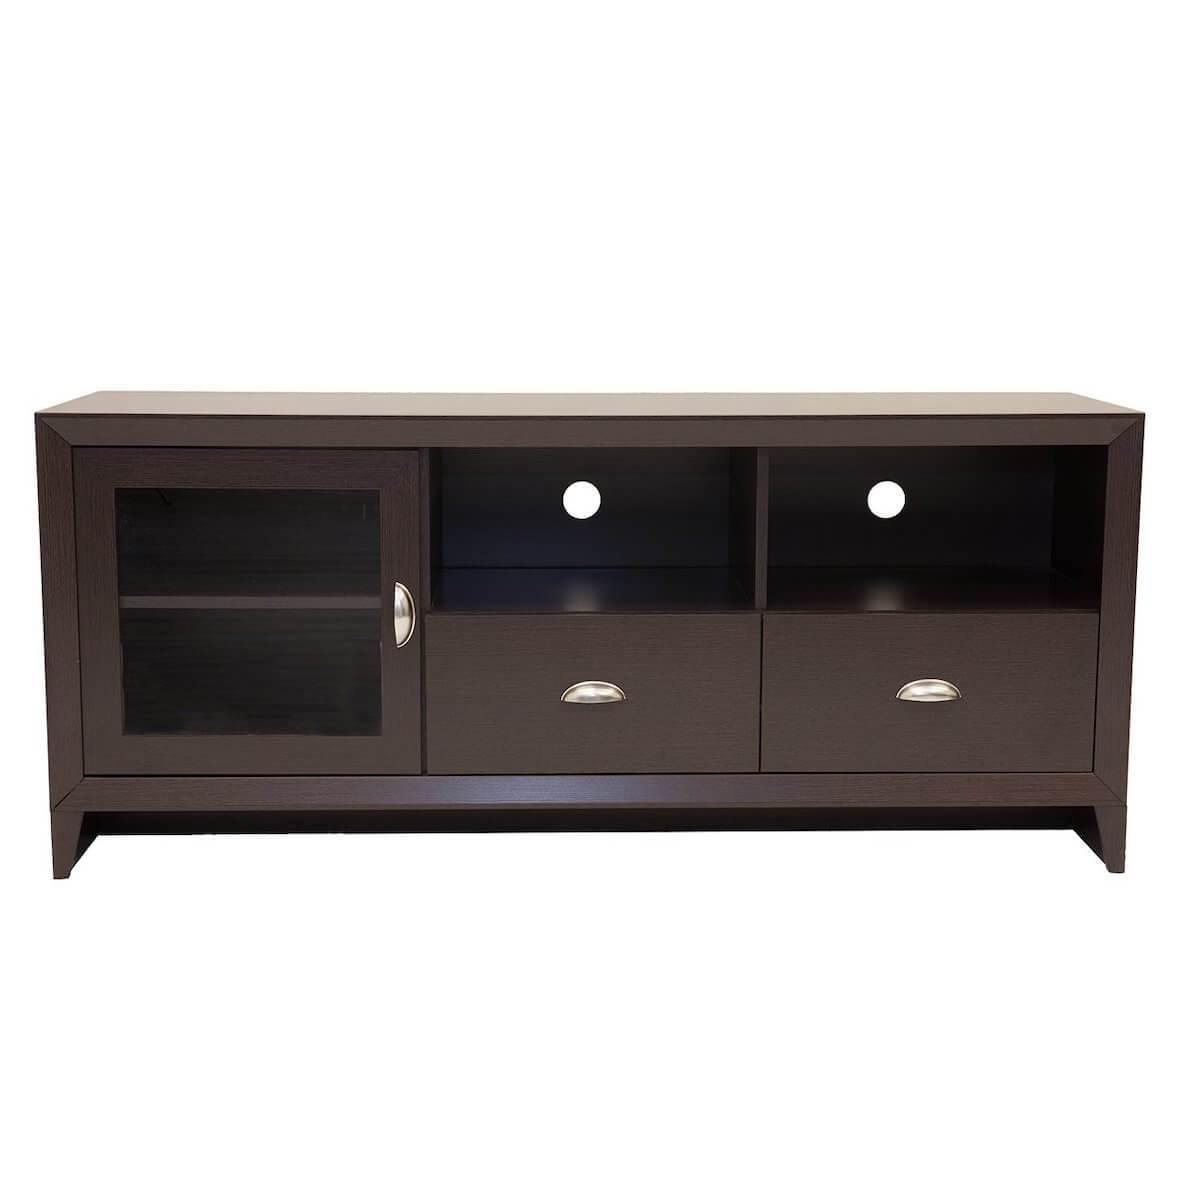 Techni Mobili Wenge Modern TV Stand with Storage for TVs Up To 60" RTA-8807-WN